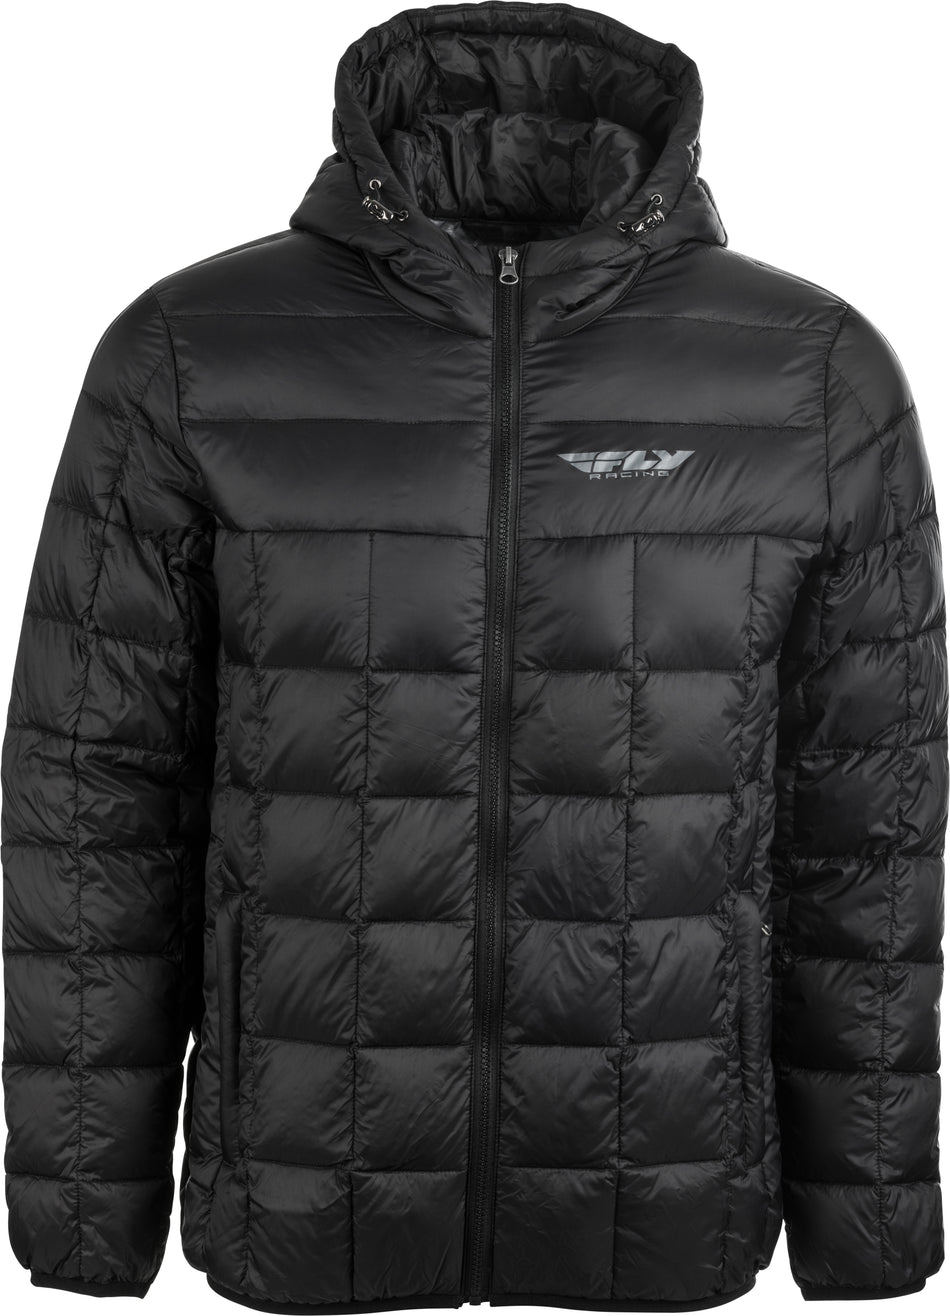 FLY RACING Fly Spark Down Jacket Black Lg 354-6180L